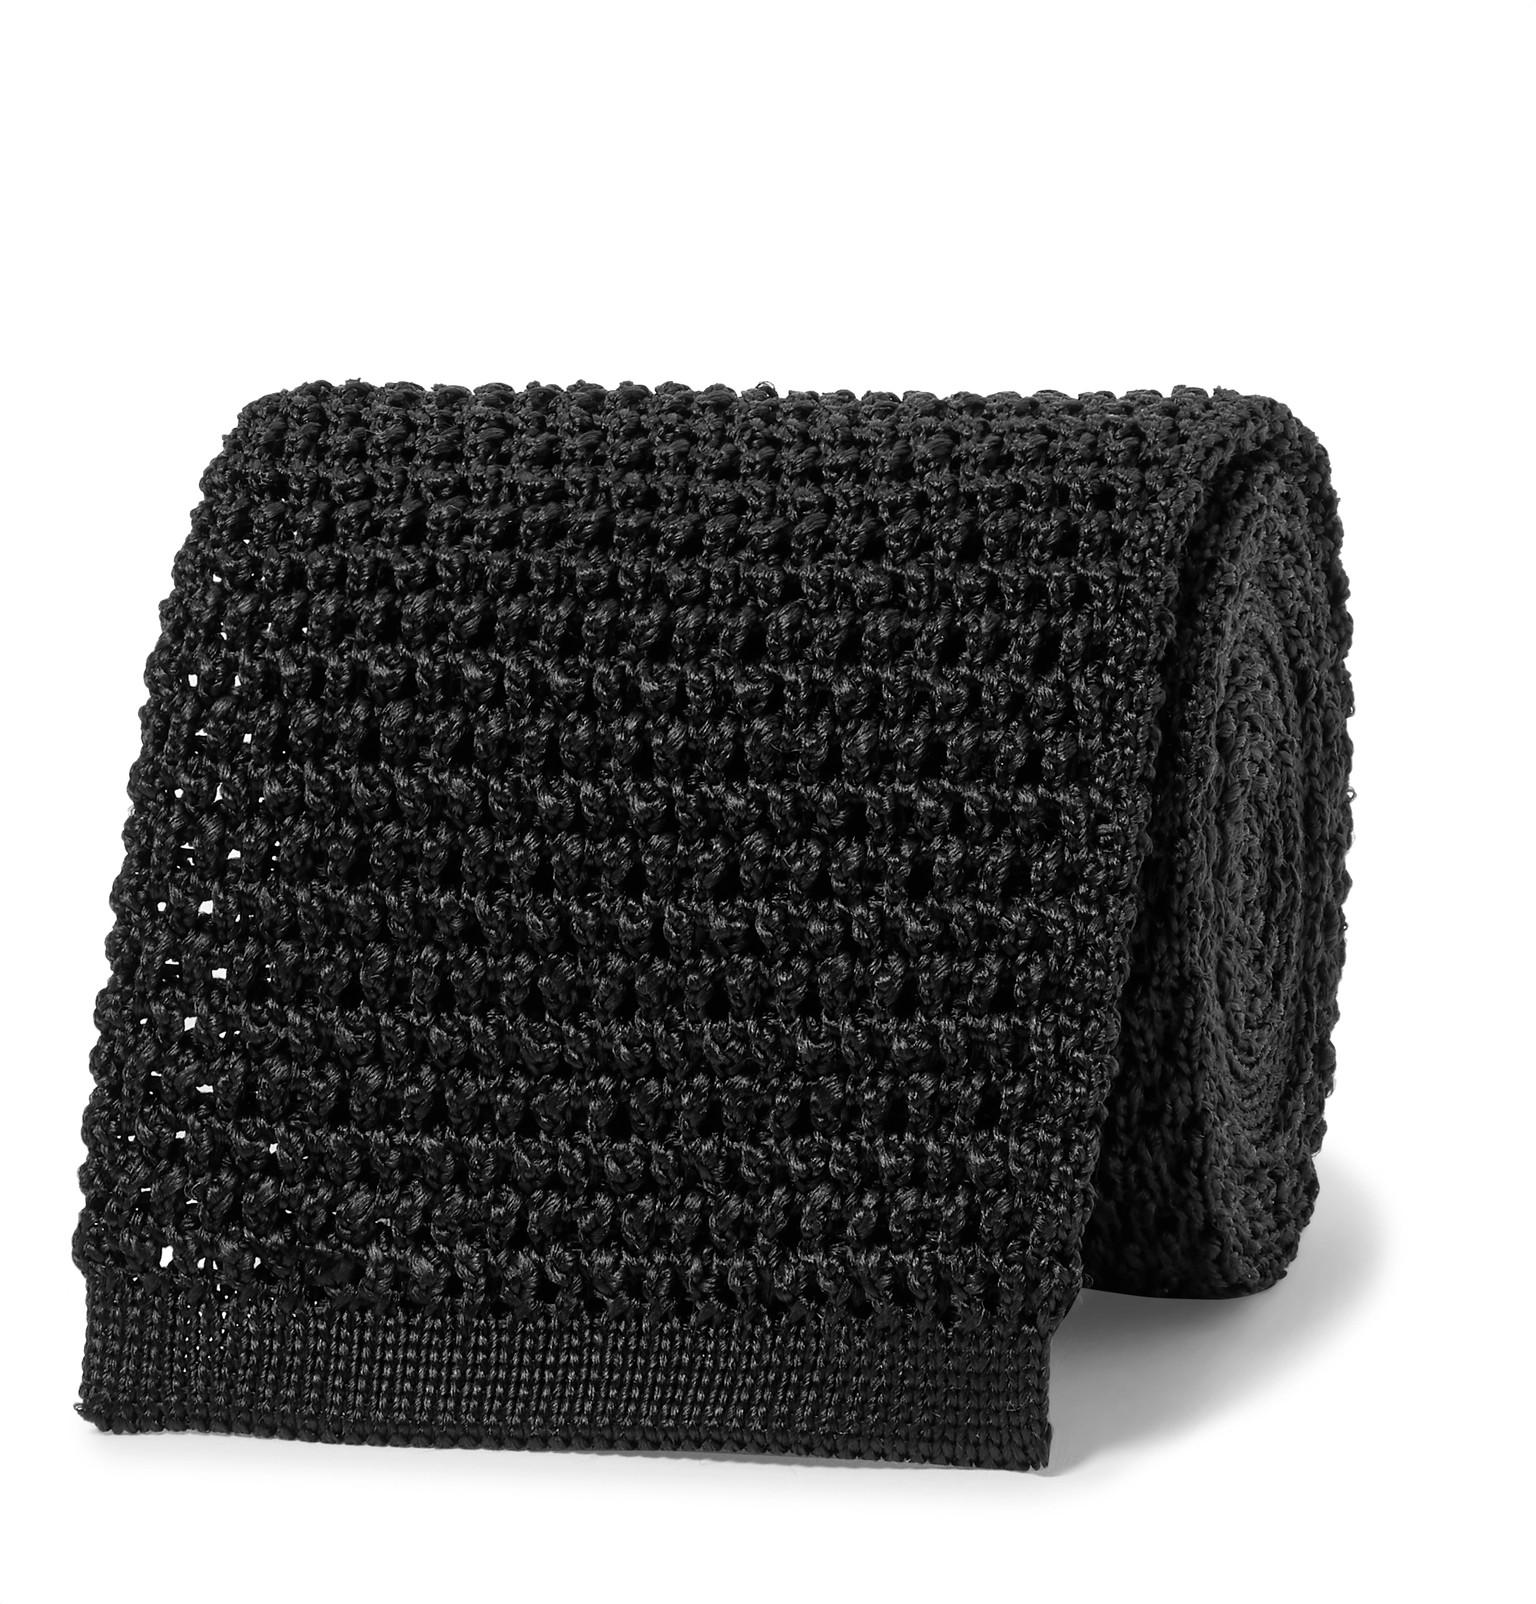 Tom Ford 7.5cm Knitted Silk Tie in Black for Men - Lyst